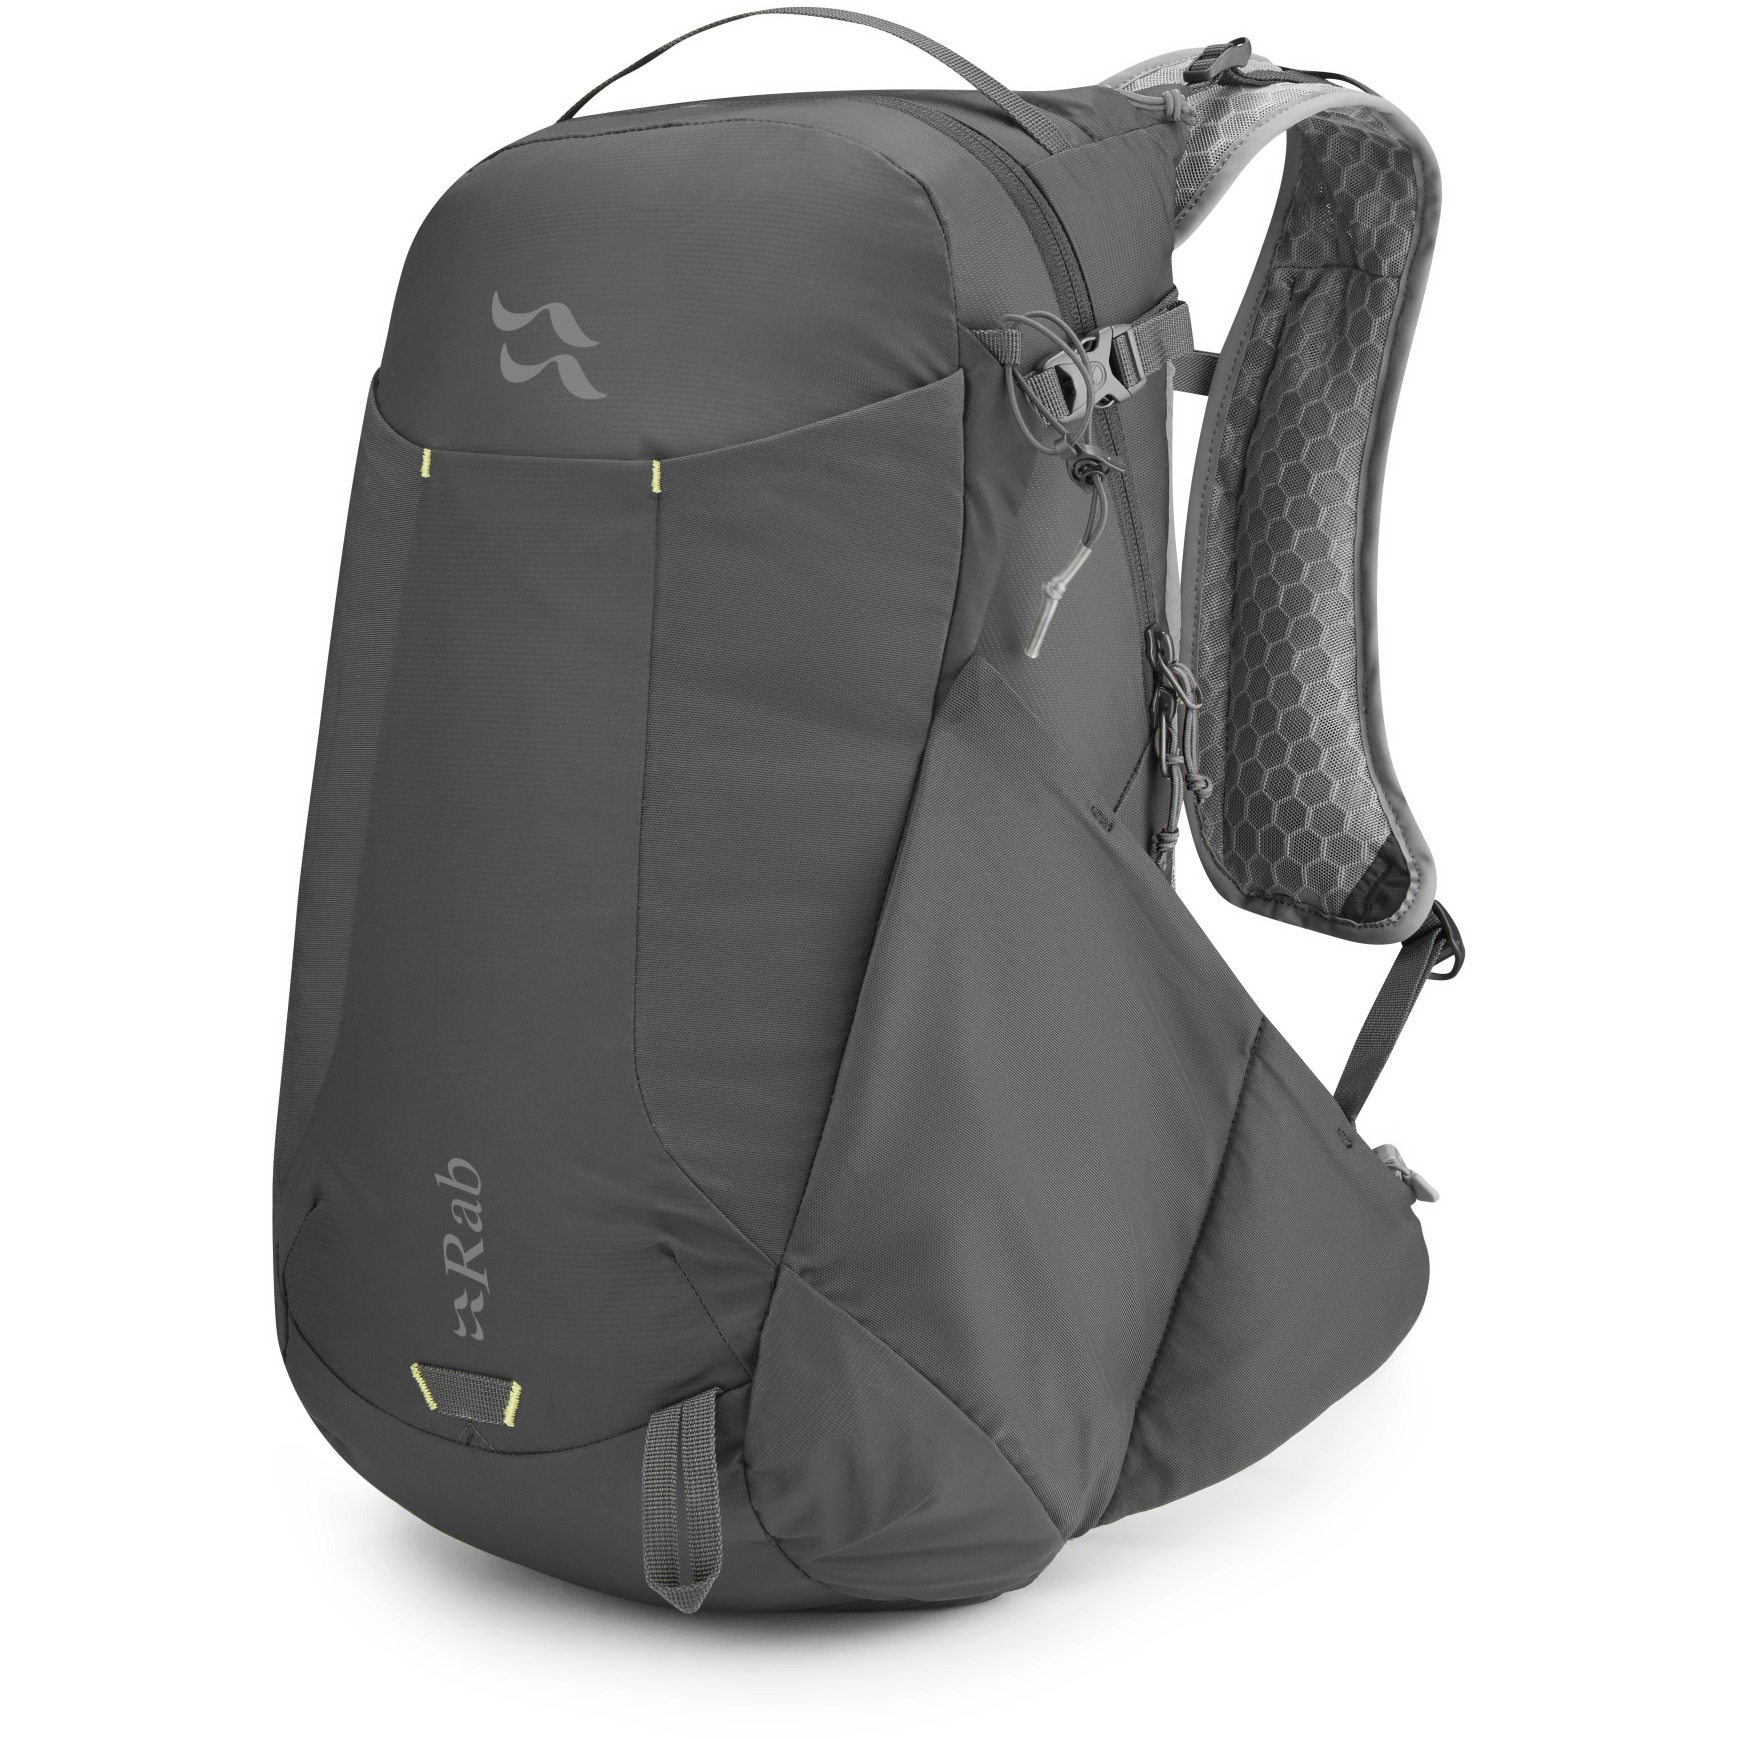 Image of Rab Aeon LT 25L Backpack - anthracite